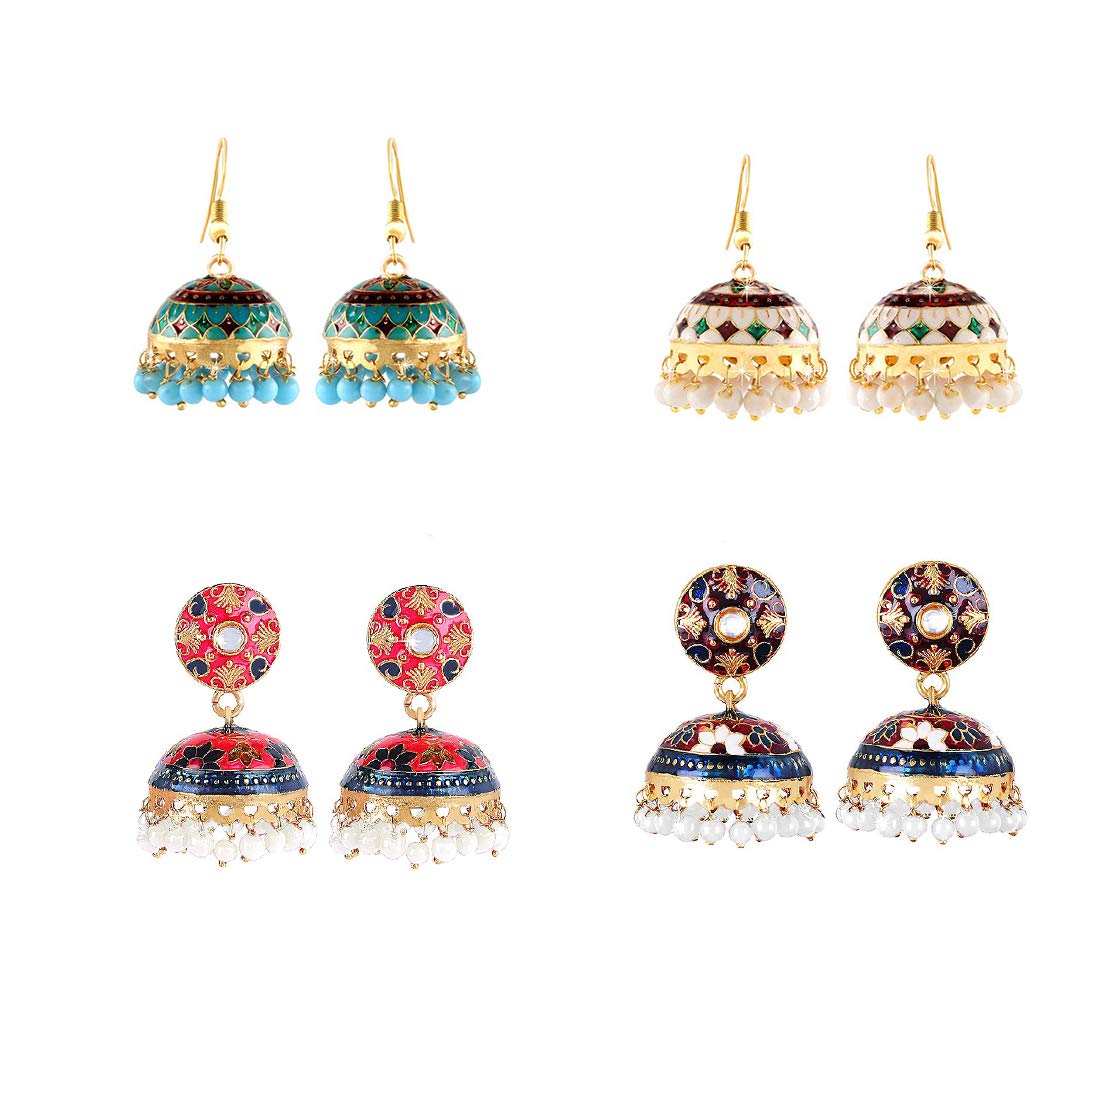 Yellow Chimes Craftsmanship Work Copper Gold Plated, Meenakari Handcrafted Floral Designer Traditional Gold Plated Jhumka/Jhumki Earrings for Women (Multicolour), Combo of 4 Pair